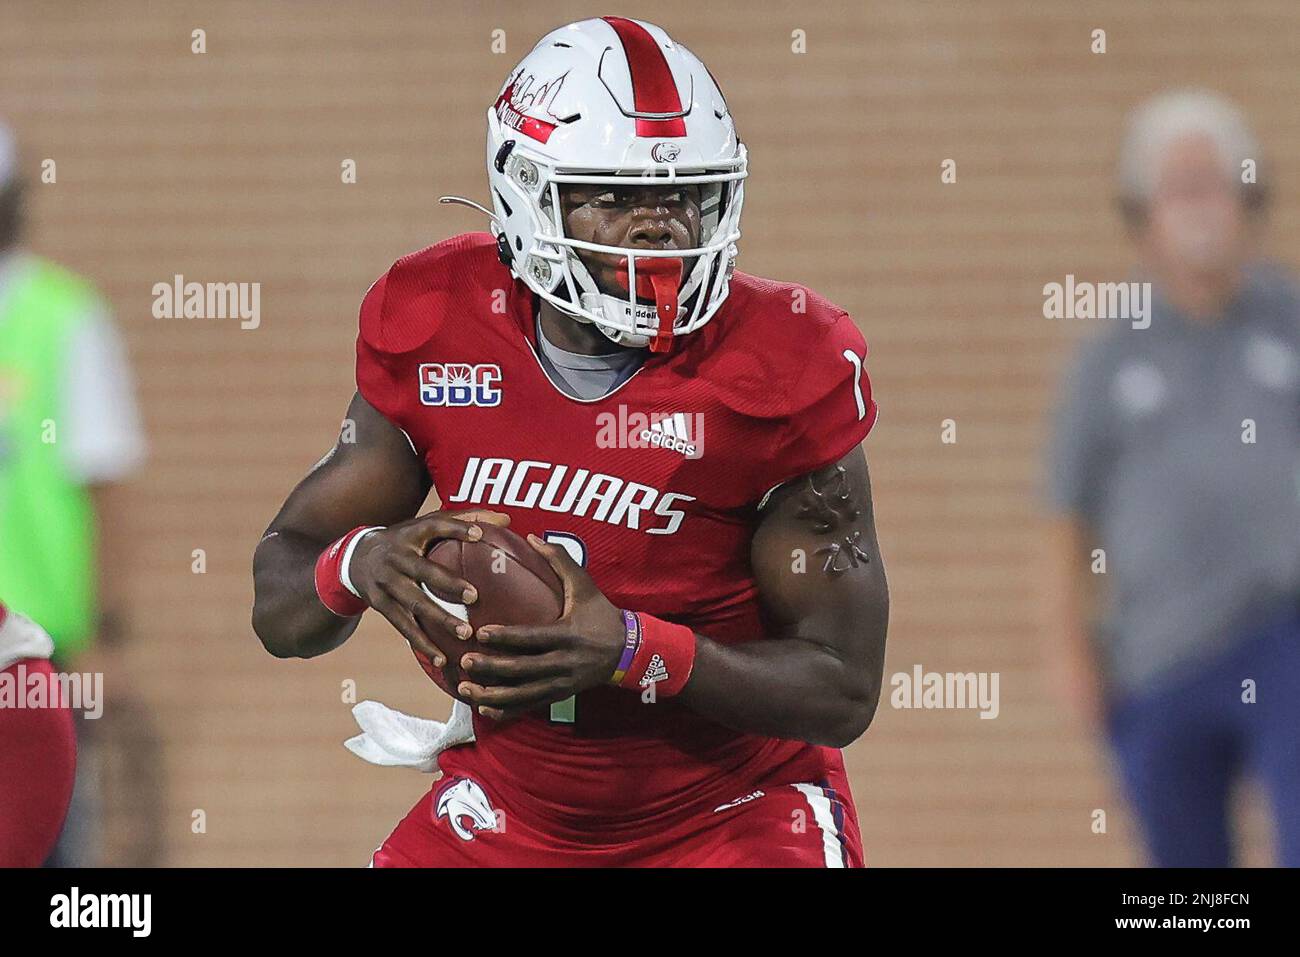 MOBILE, AL - SEPTEMBER 24: South Alabama Jaguars quarterback Desmond  Trotter (1) sets to pass during a college football game between the  Louisiana Tech Bulldogs and the South Alabama Jaguars at Hancock-Whitney